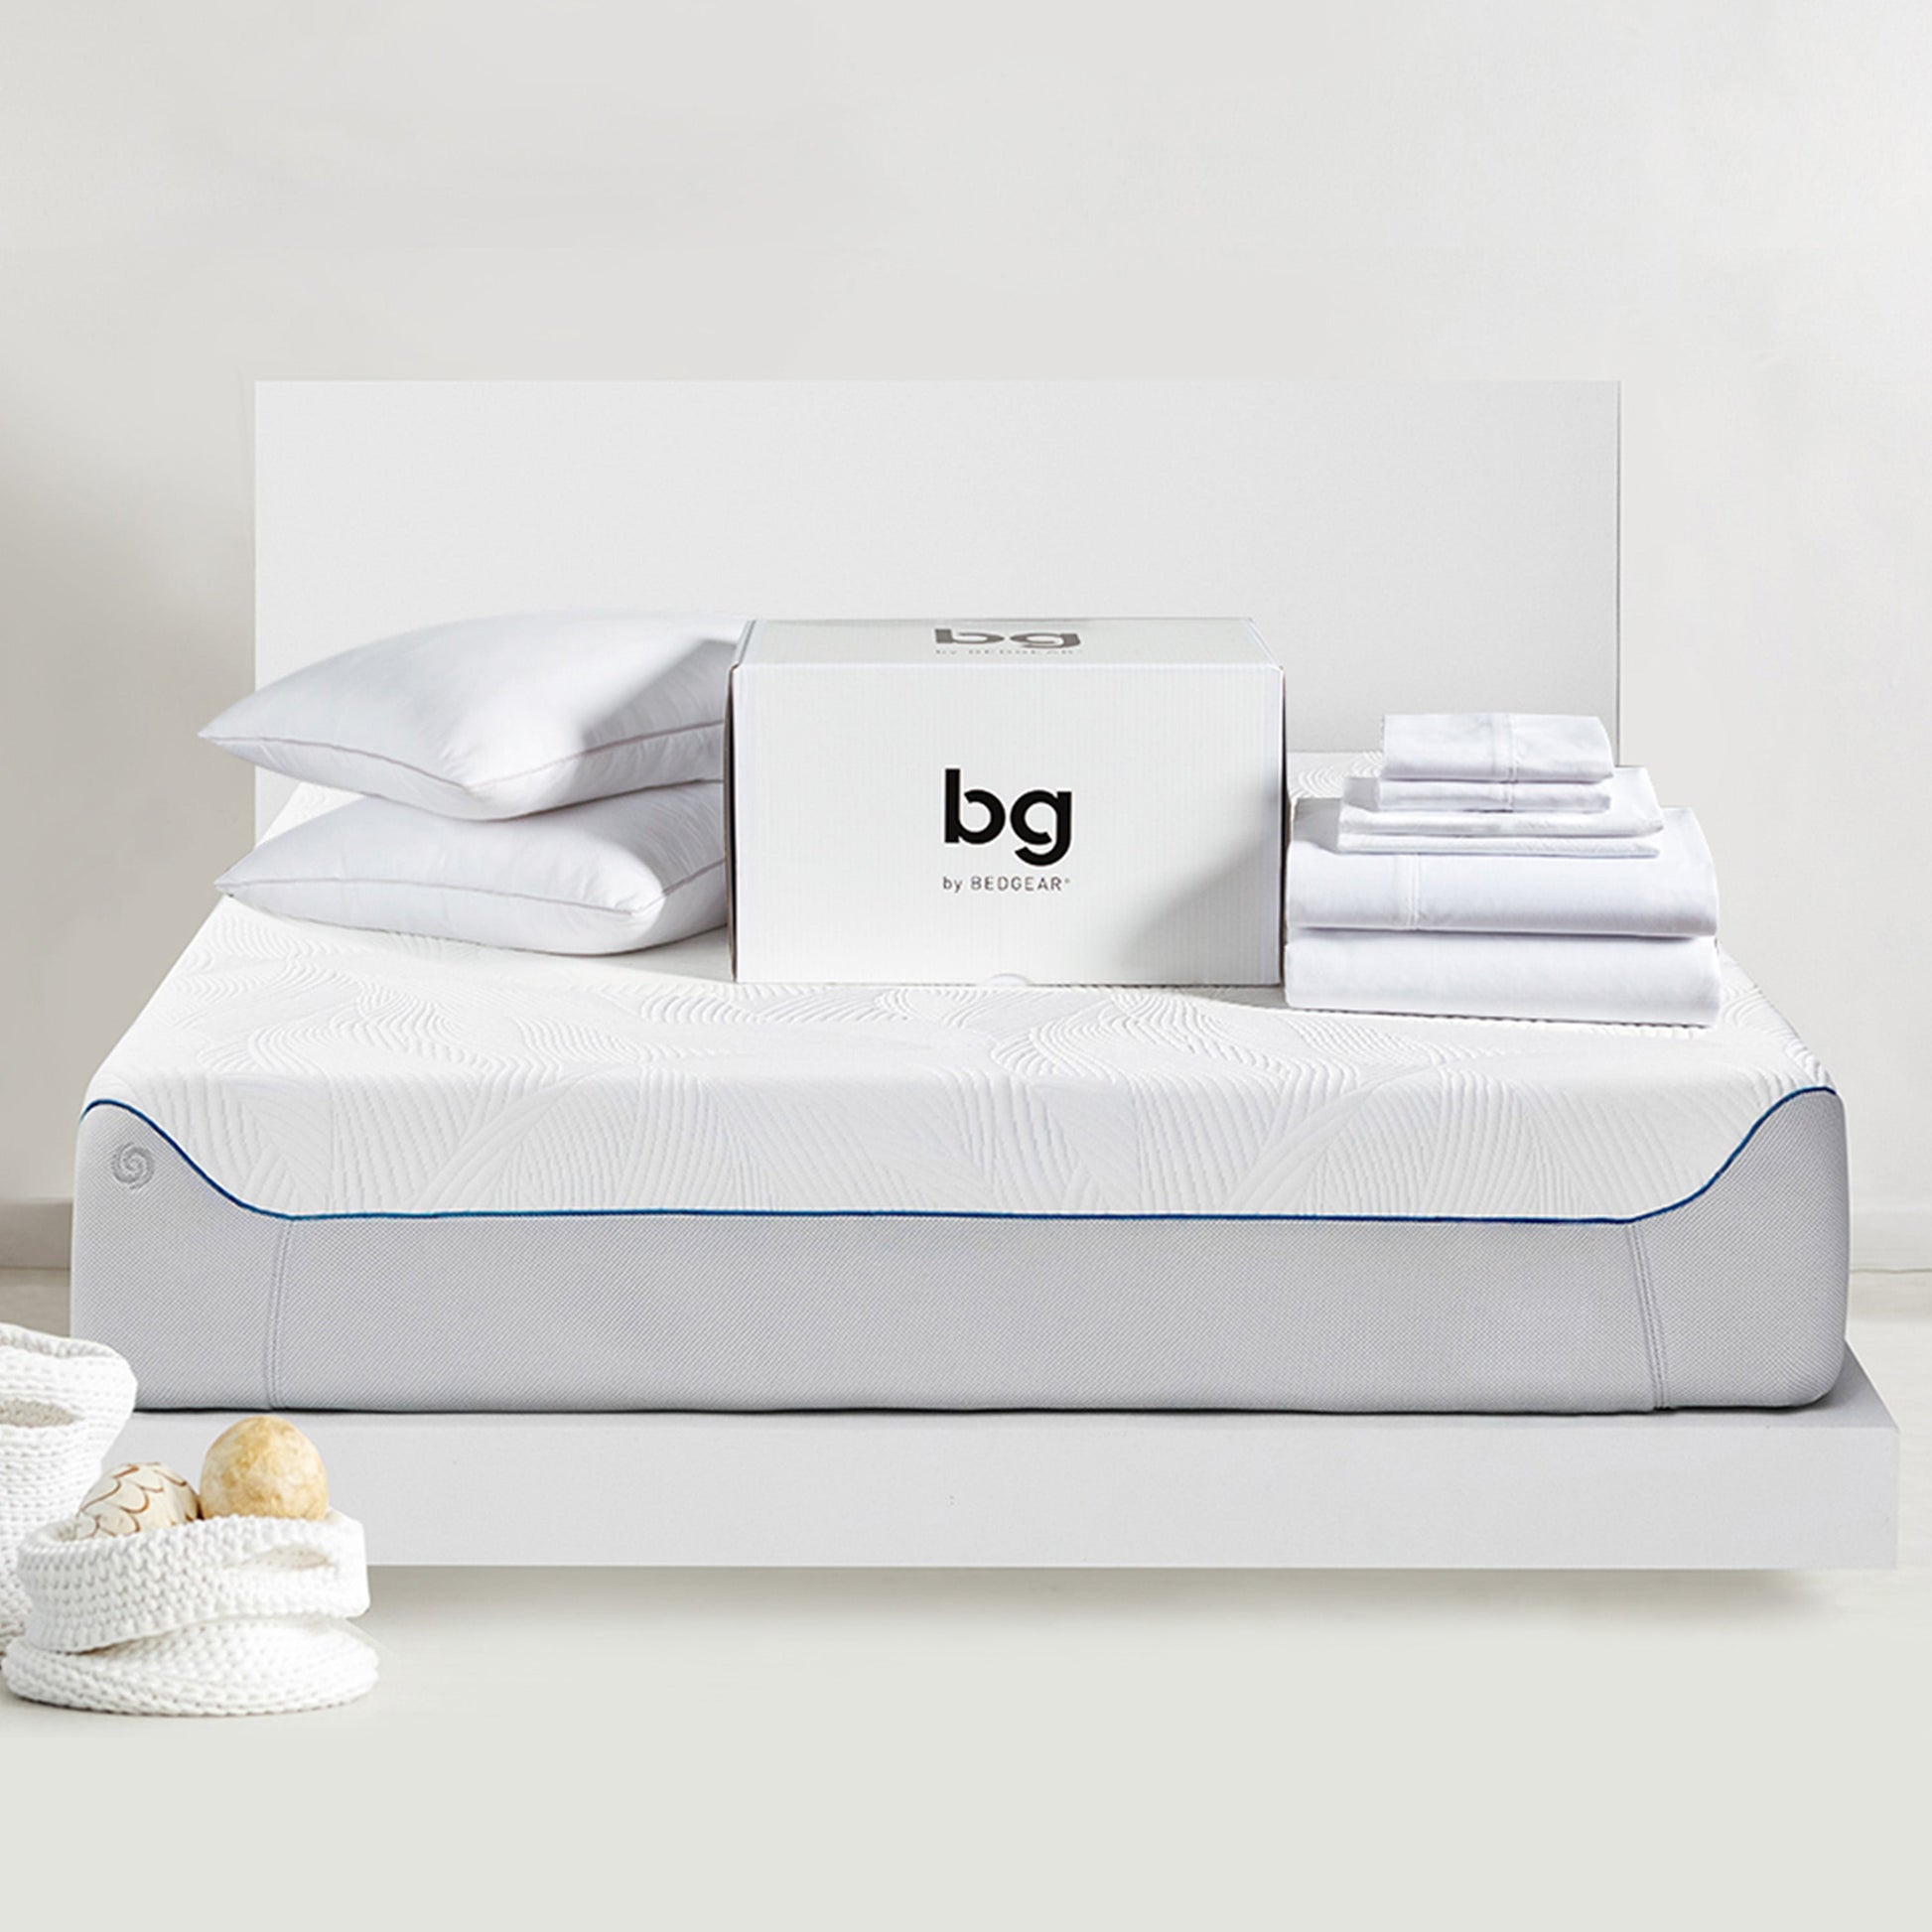 BG by Bedgear Complete Bedding Set On Bedgear Mattress *Bundle does not come with mattress